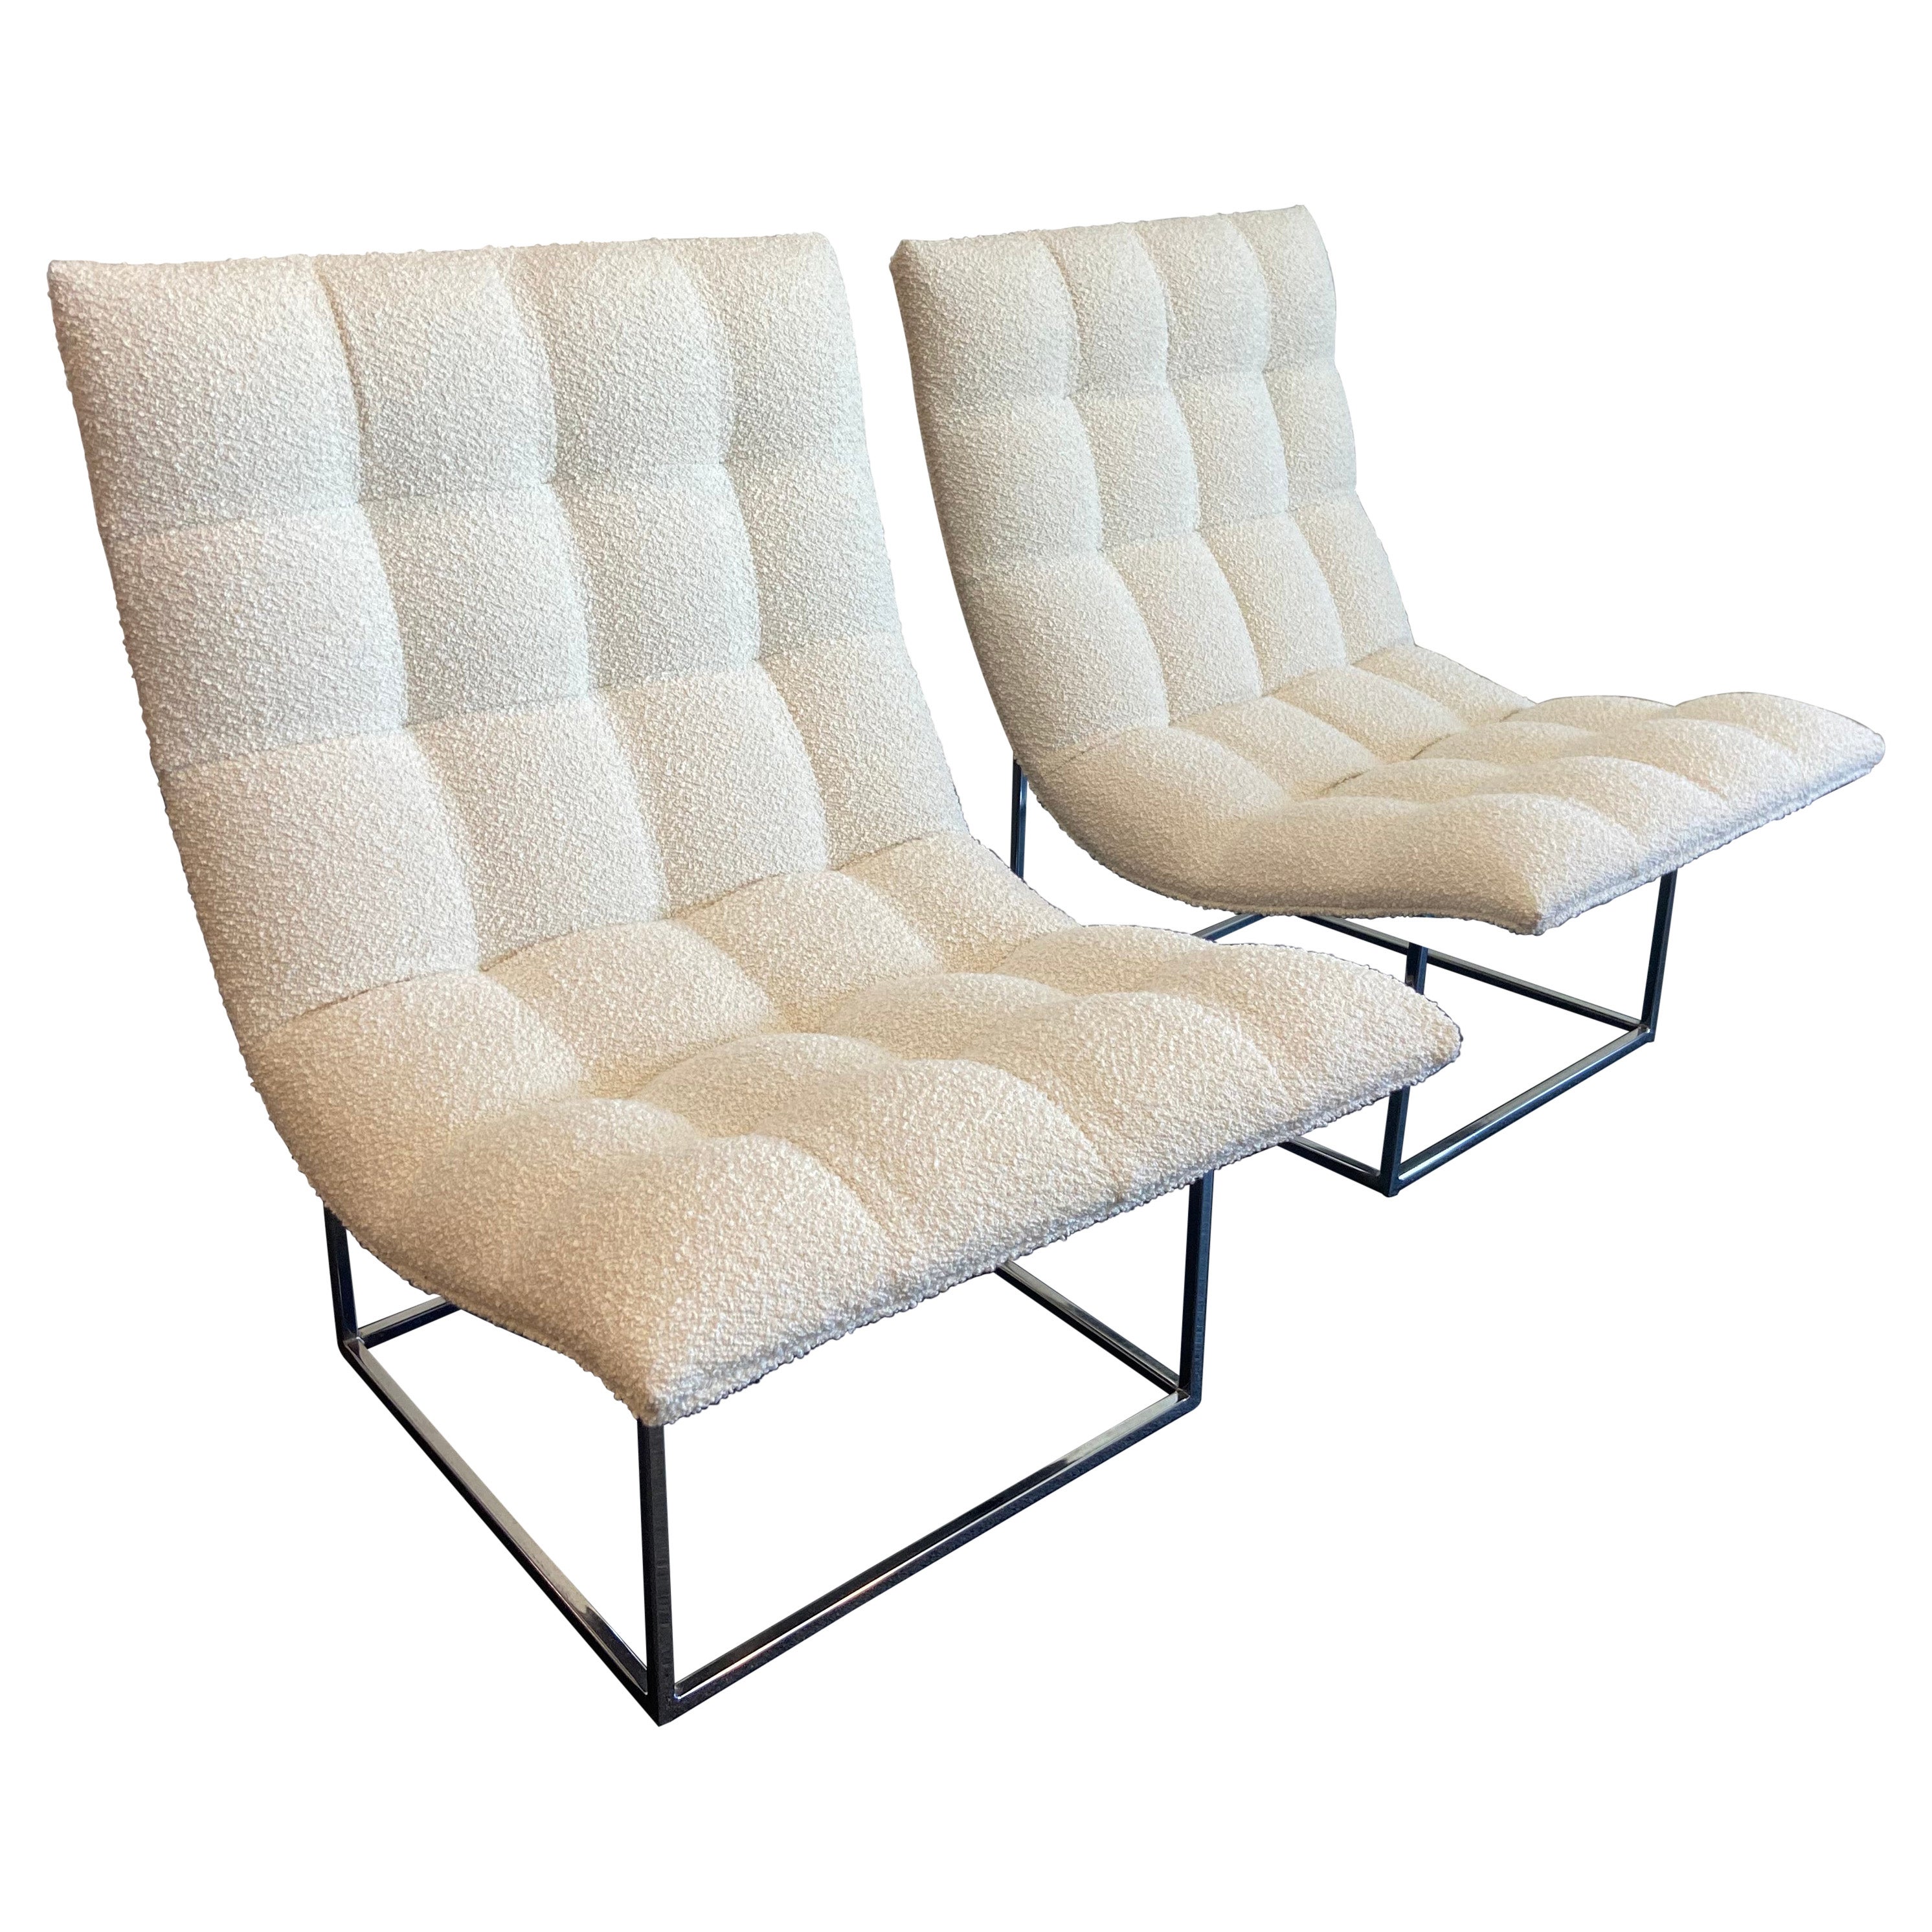 Milo Baughman For Thayer Coggin Scoop Lounge Chairs- A Pair For Sale